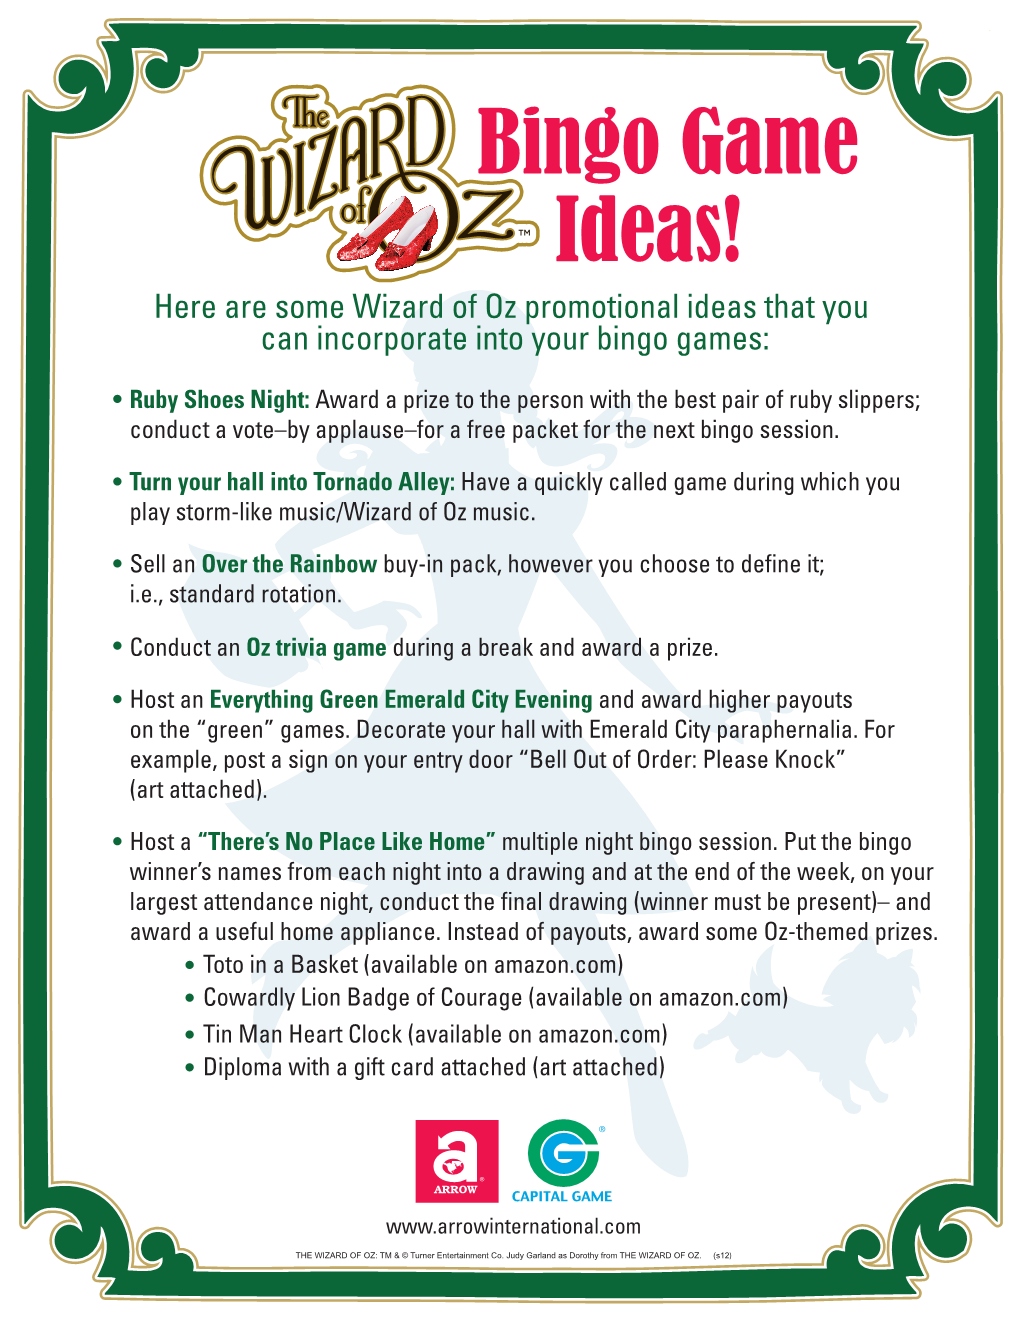 Bingo Game Ideas! Here Are Some Wizard of Oz Promotional Ideas That You Can Incorporate Into Your Bingo Games